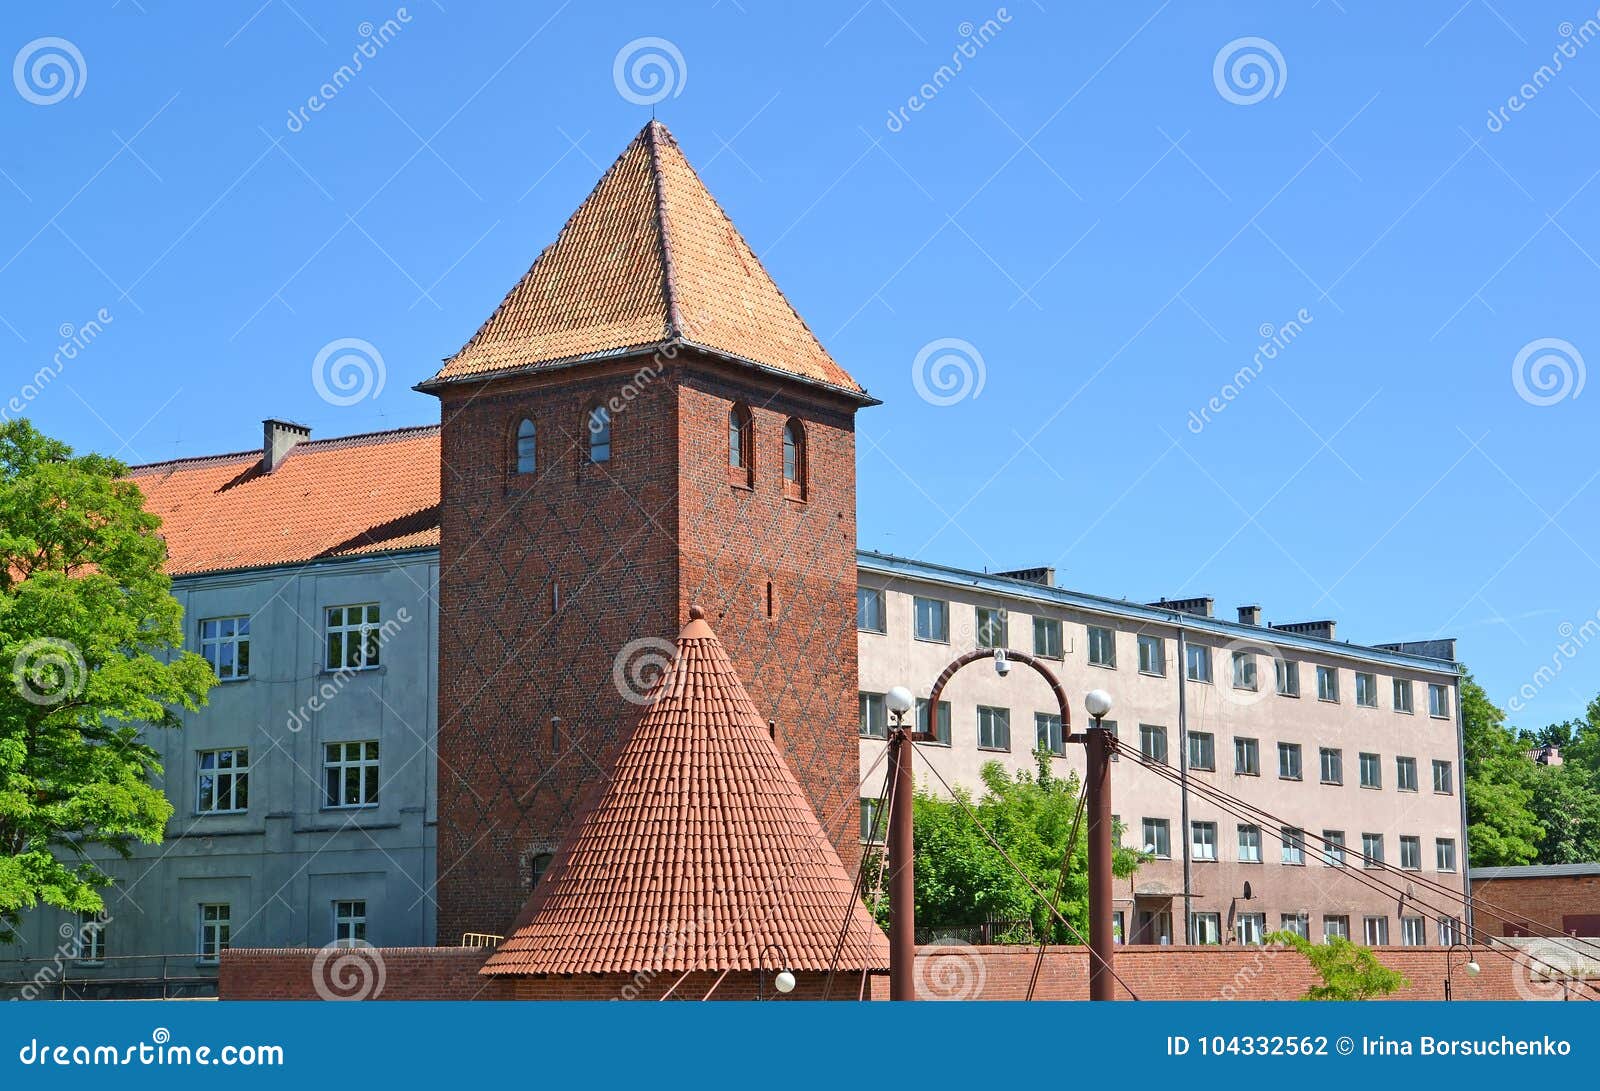 building of a gymnasium of jesuits and watchtower. braniewo, pol